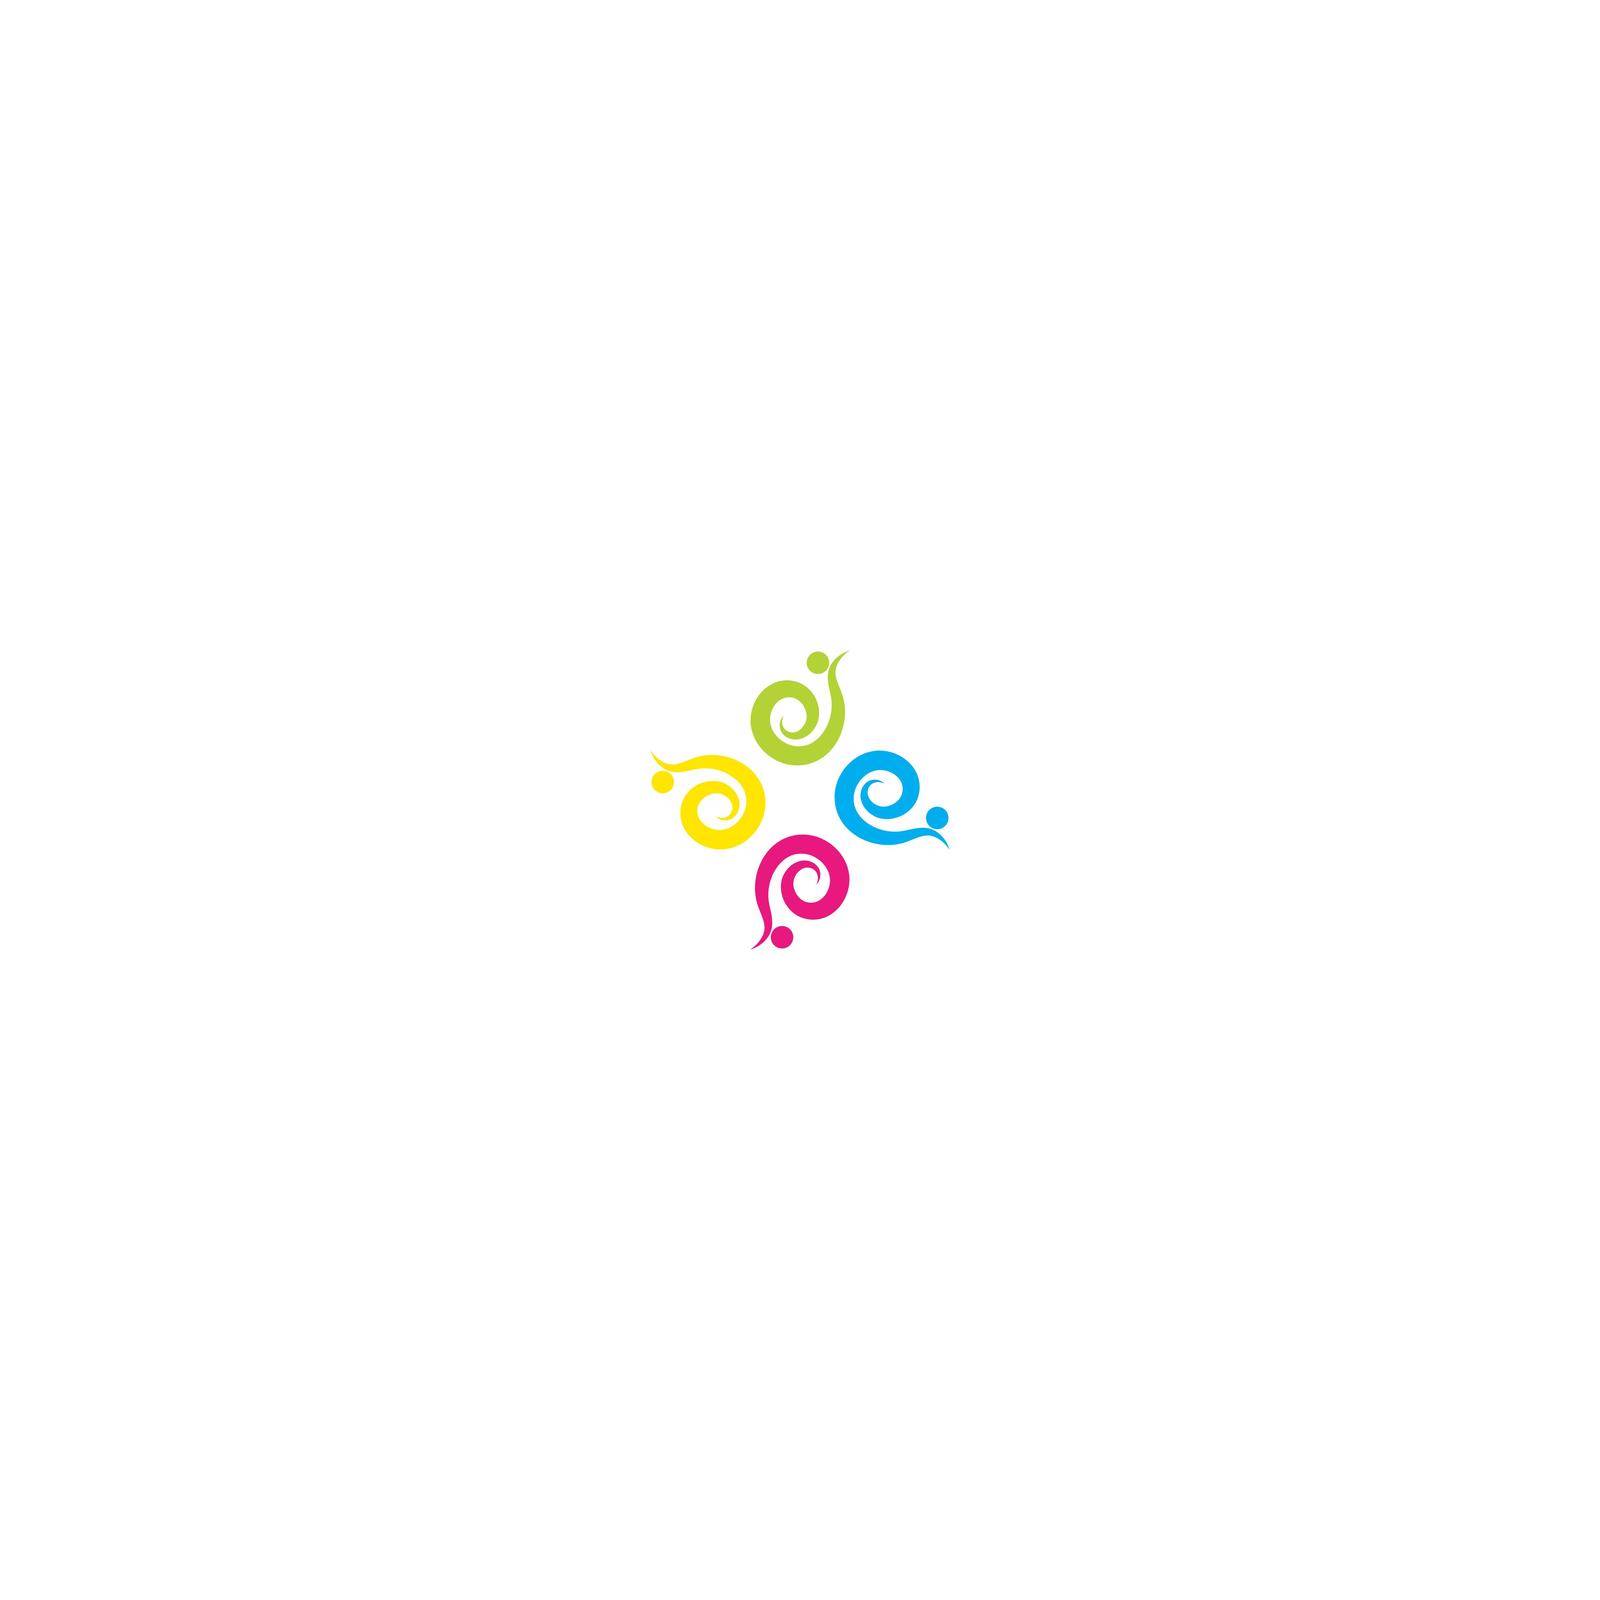 Community group, People group, Care logo icon by bellaxbudhong3